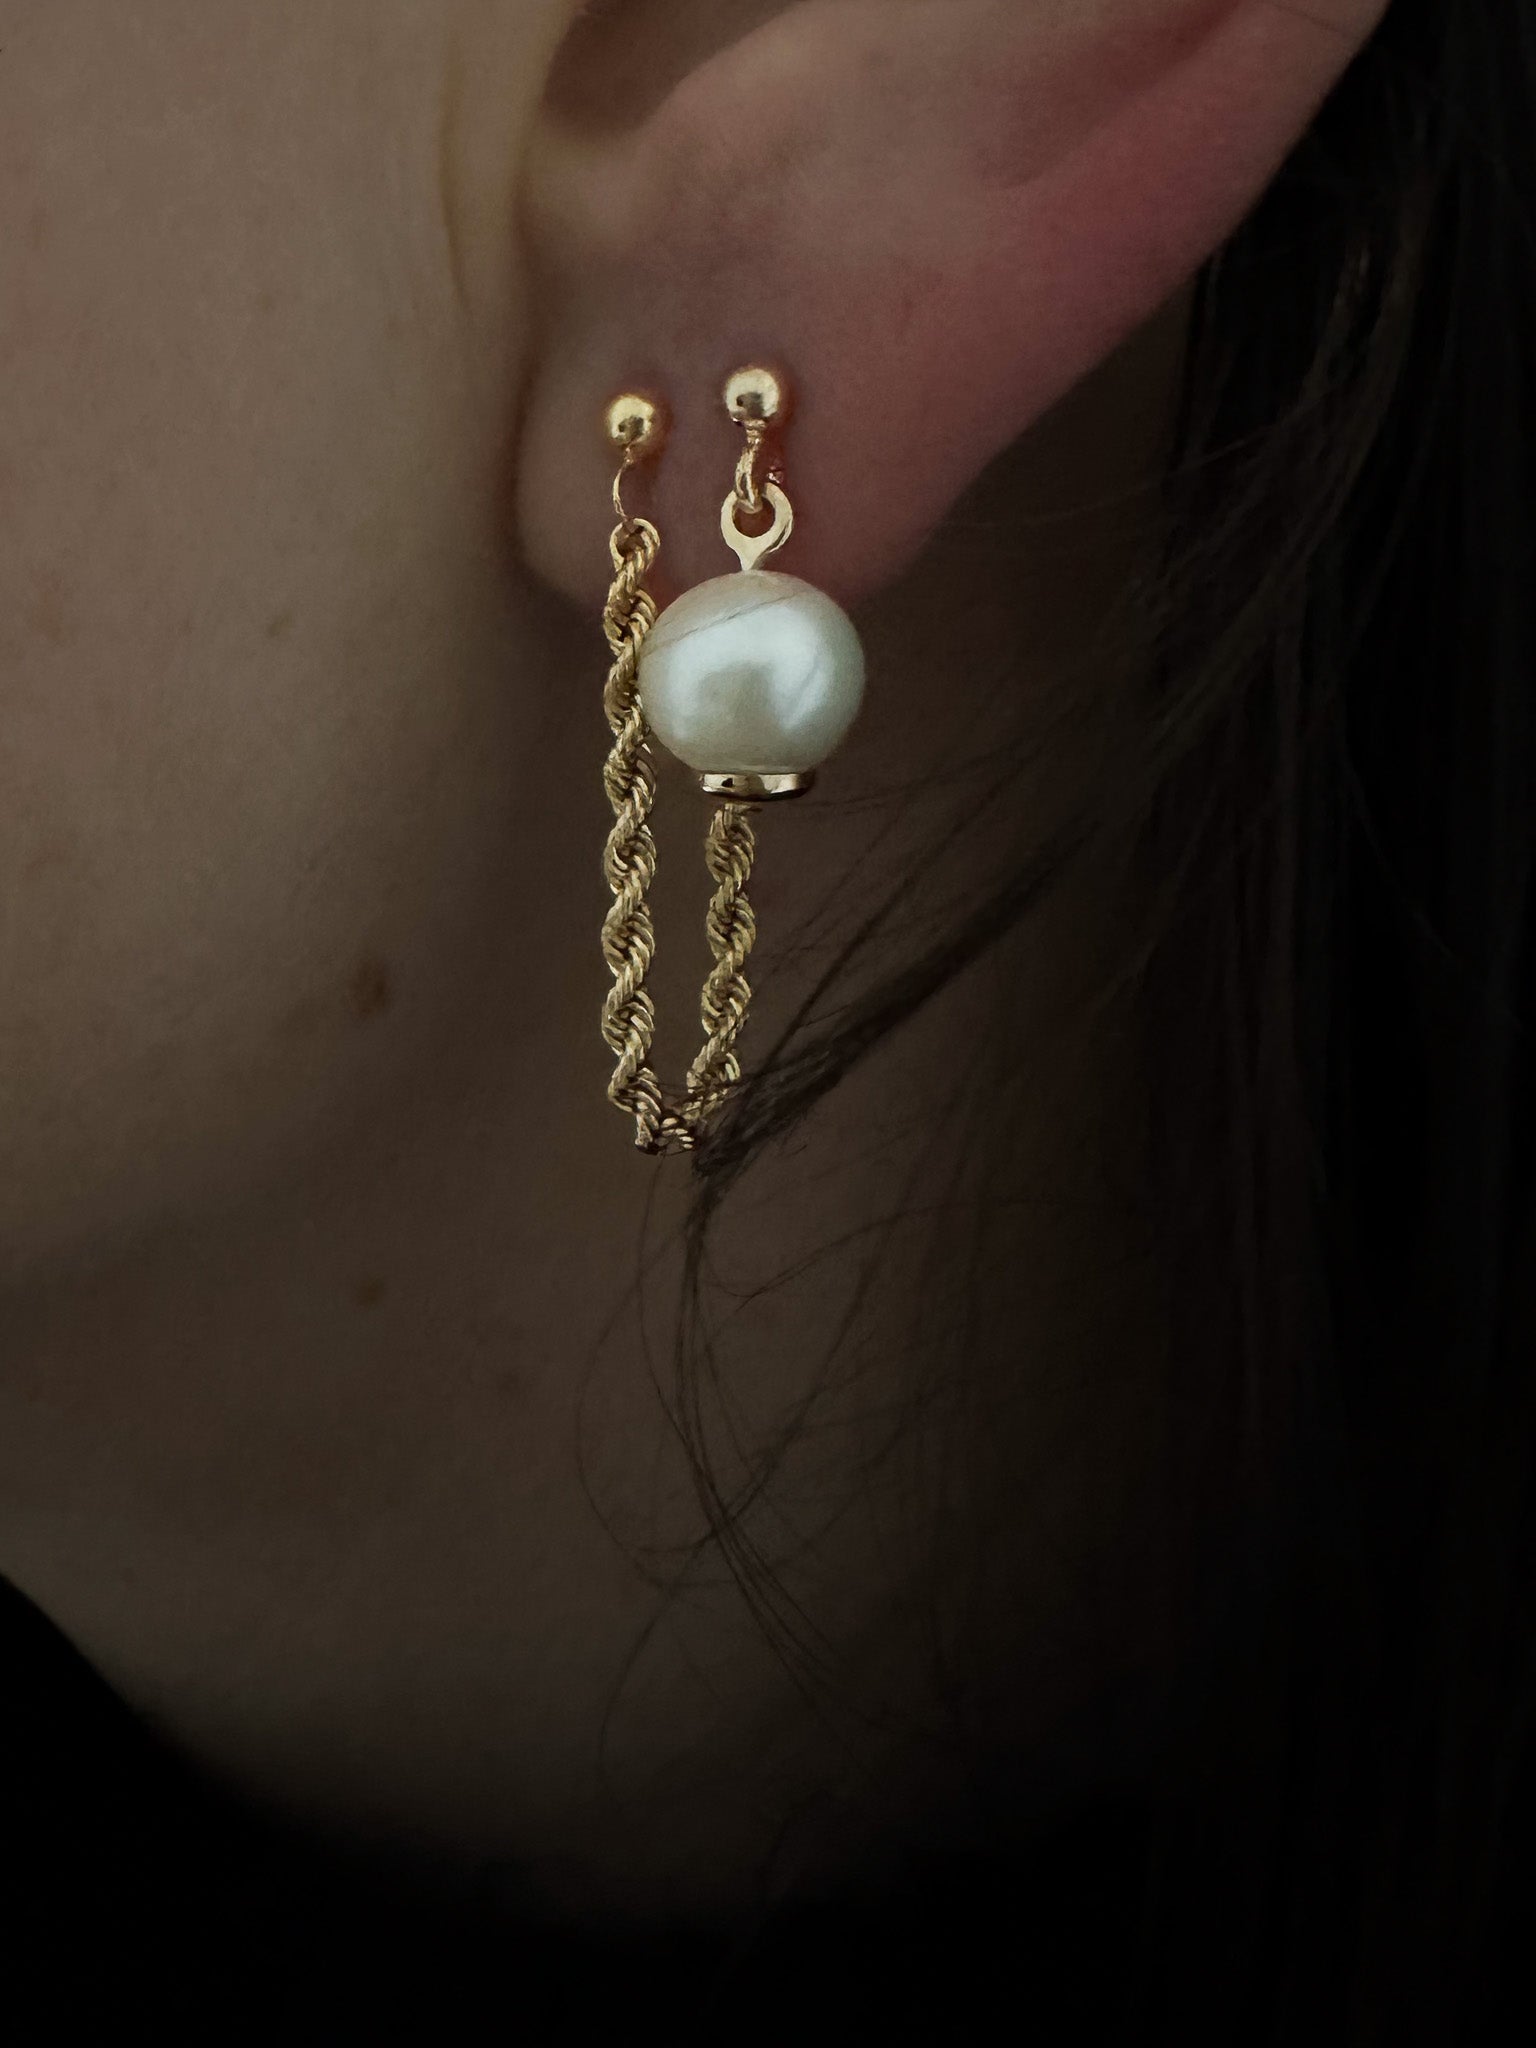 9ct gold chain earring. twisted rope chain layered on a 9ct gold ball stud. Chain -hoop earring. Freshwater pearl earring. Solitaire pearl on a ball stud.